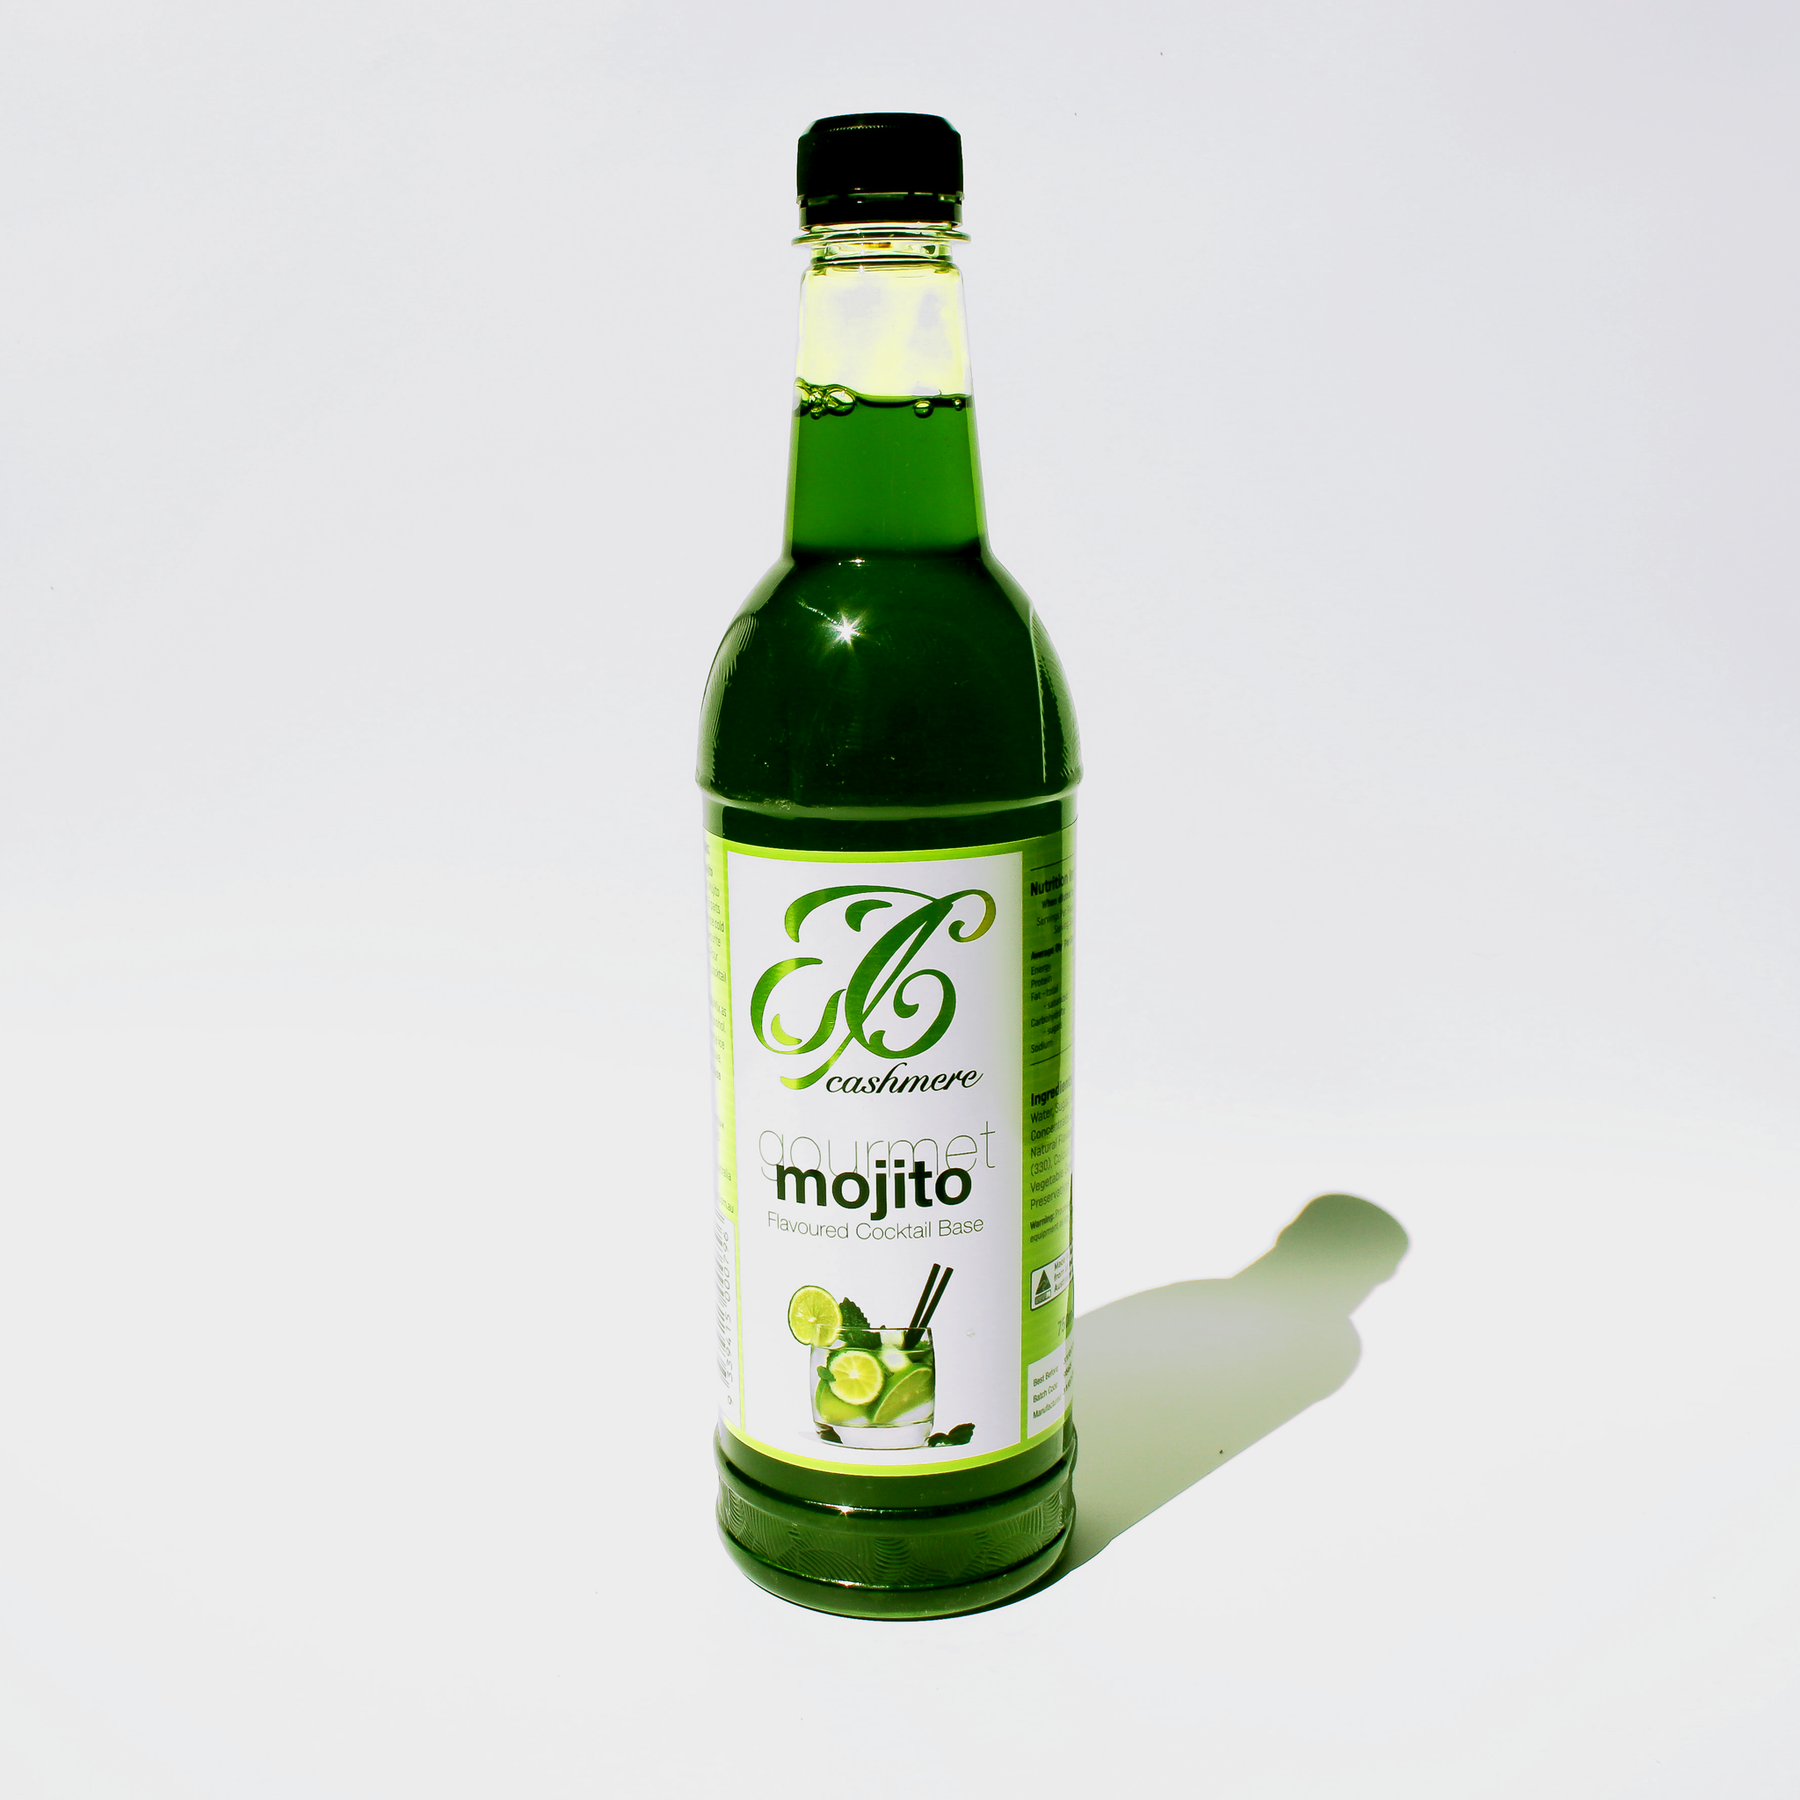 Mojito Cocktail Mix – Cashmere Syrups